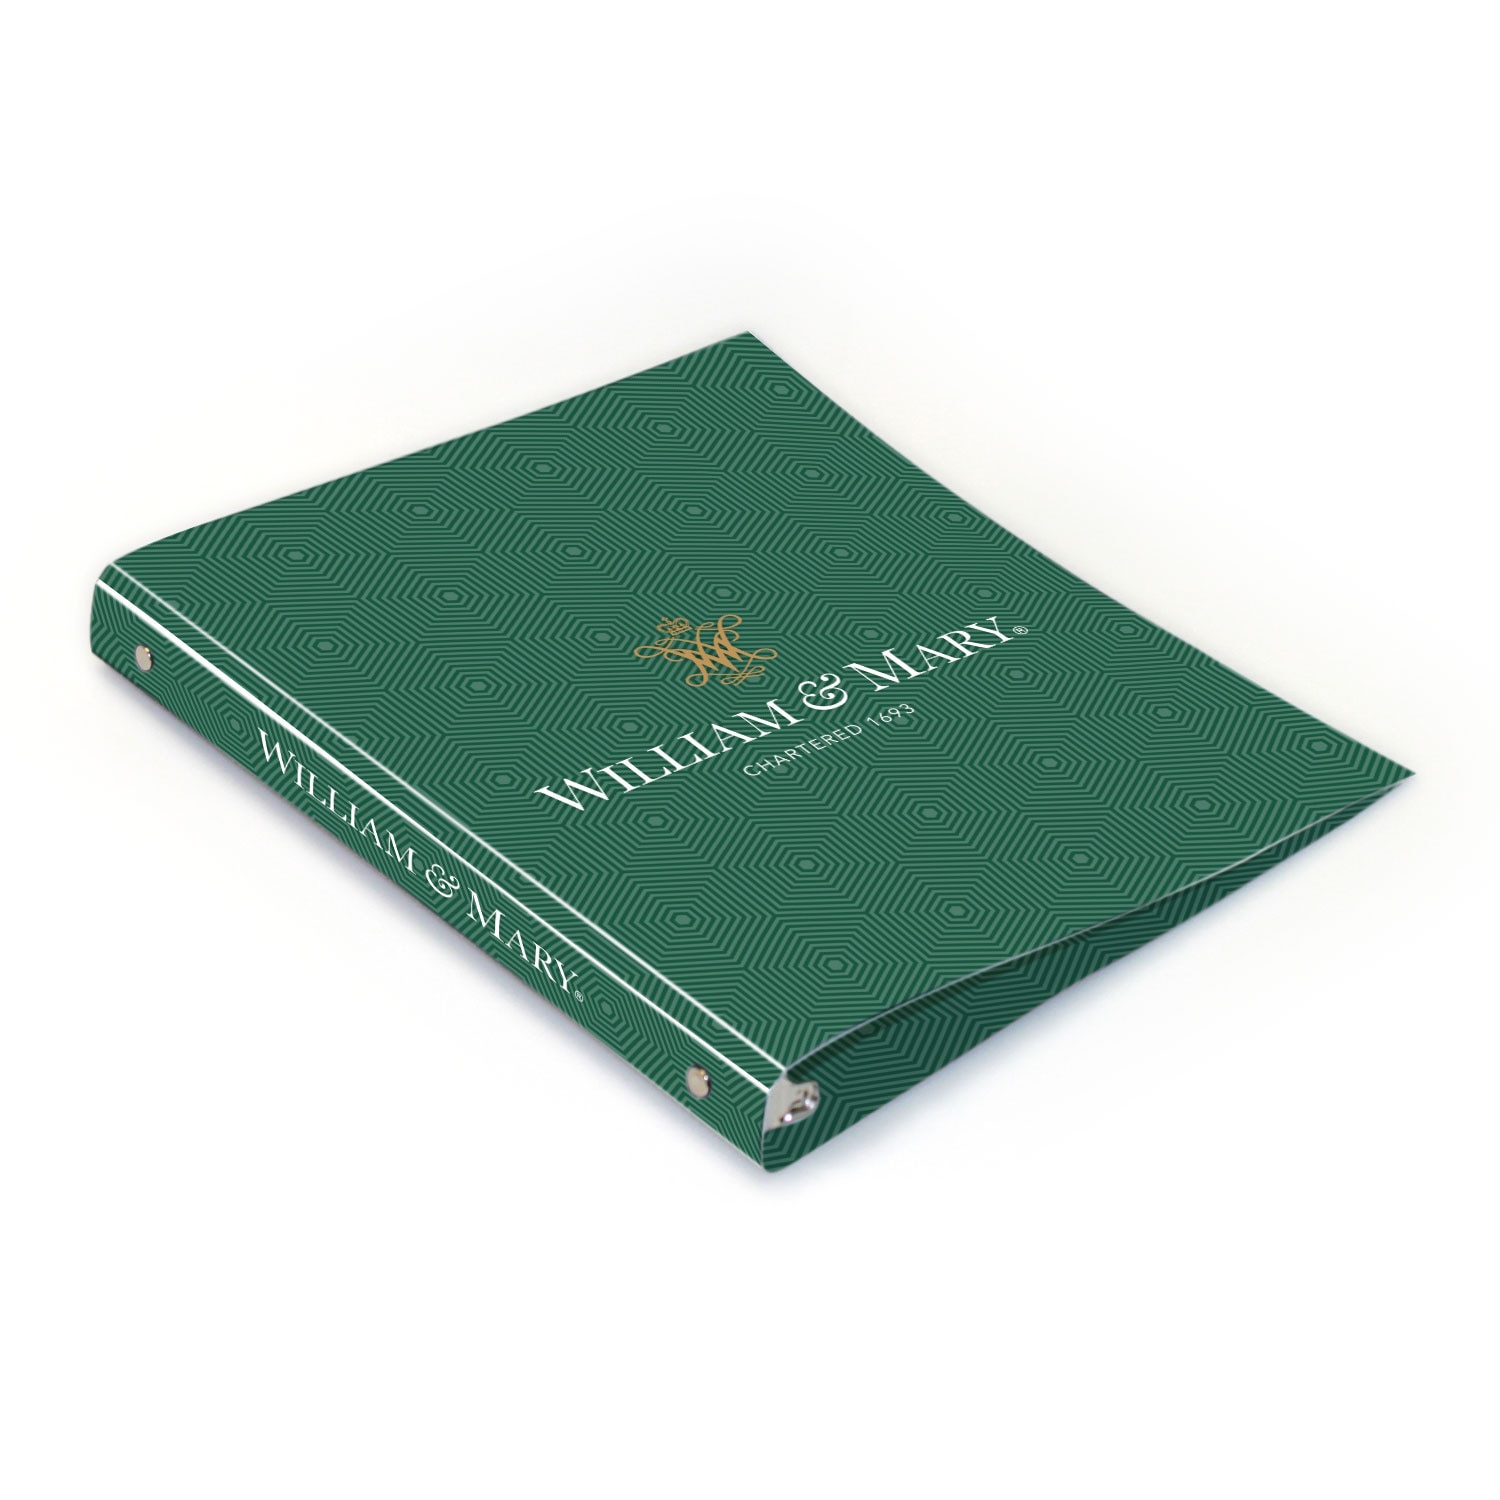 William & Mary Full Color 2 sided Imprinted Flexible 1" Logo 1 Binder 10.5" x 11.5"